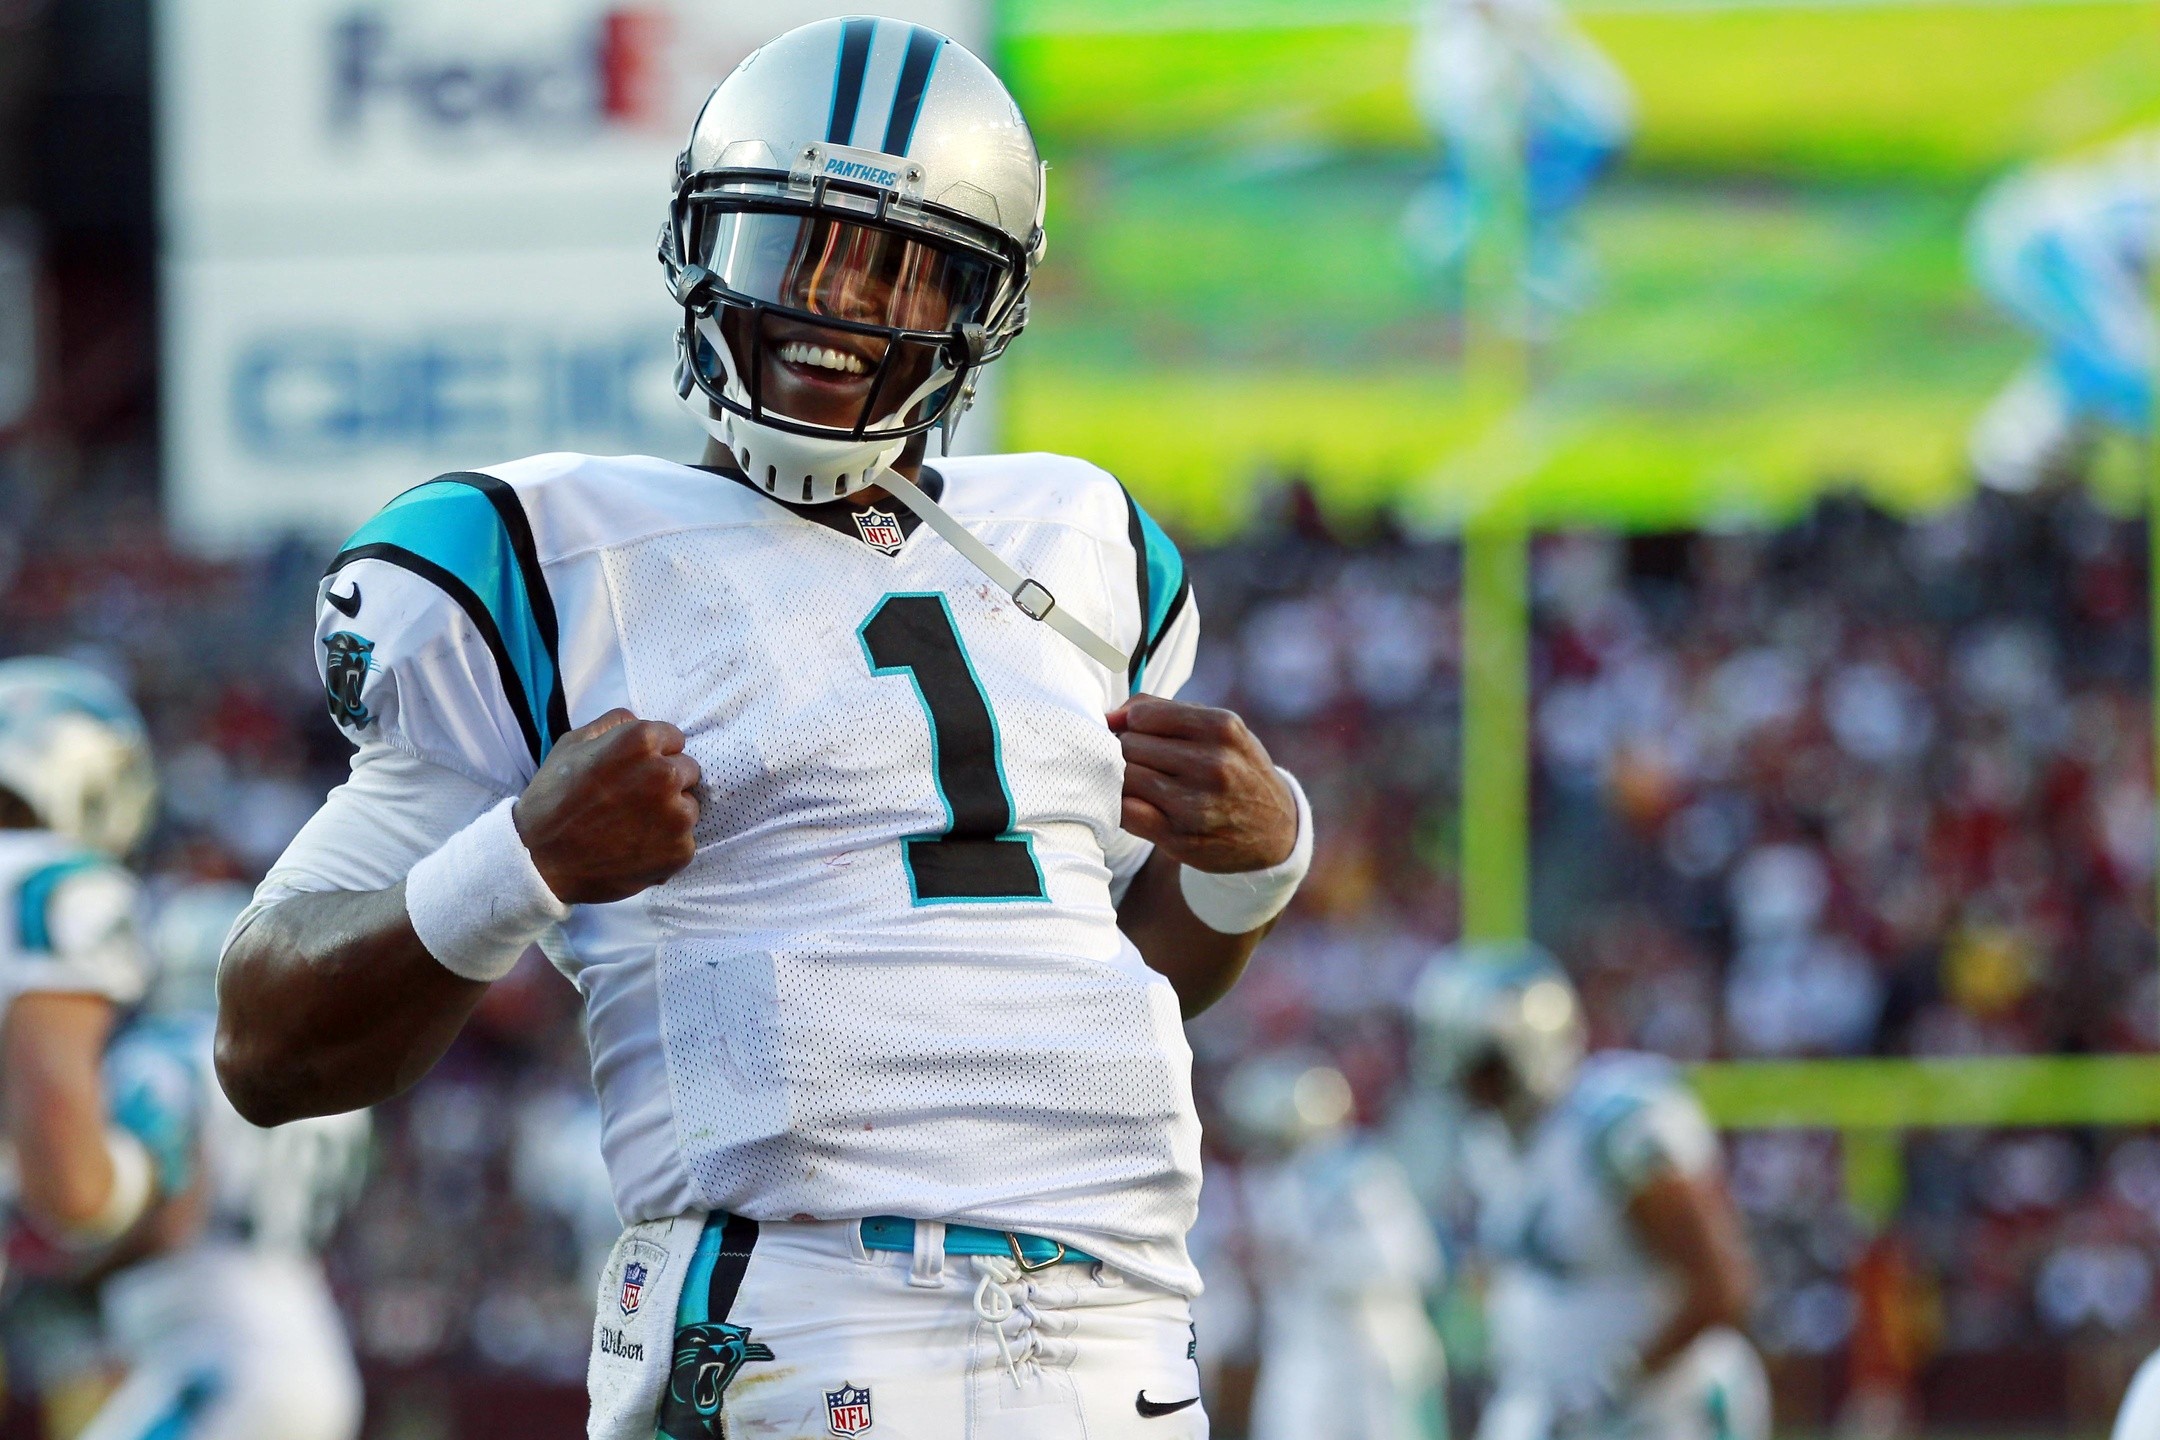 2160x1440 Cam Newton 2014 Related Keywords & Suggestions - Cam Newton 2014 Long .